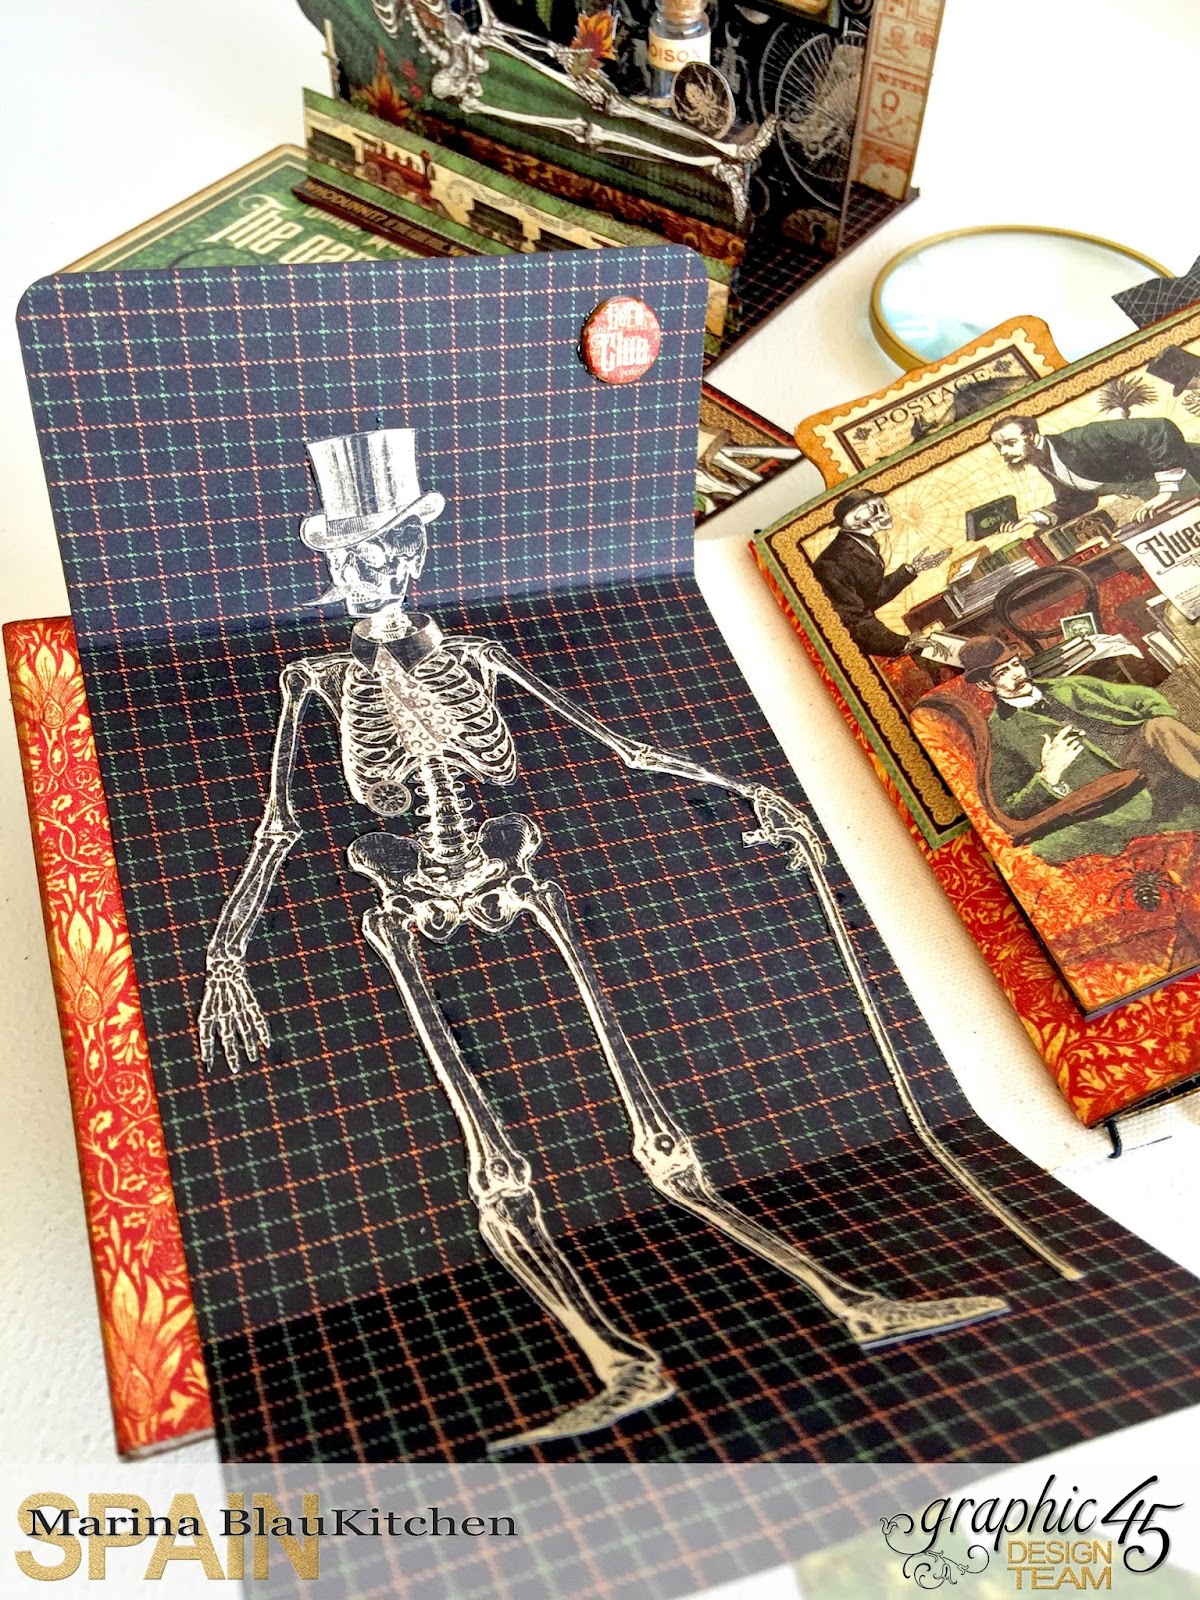 Stand and Mini Album Master Detective by Marina Blaukitchen Product by Graphic 45 photo 15.jpg